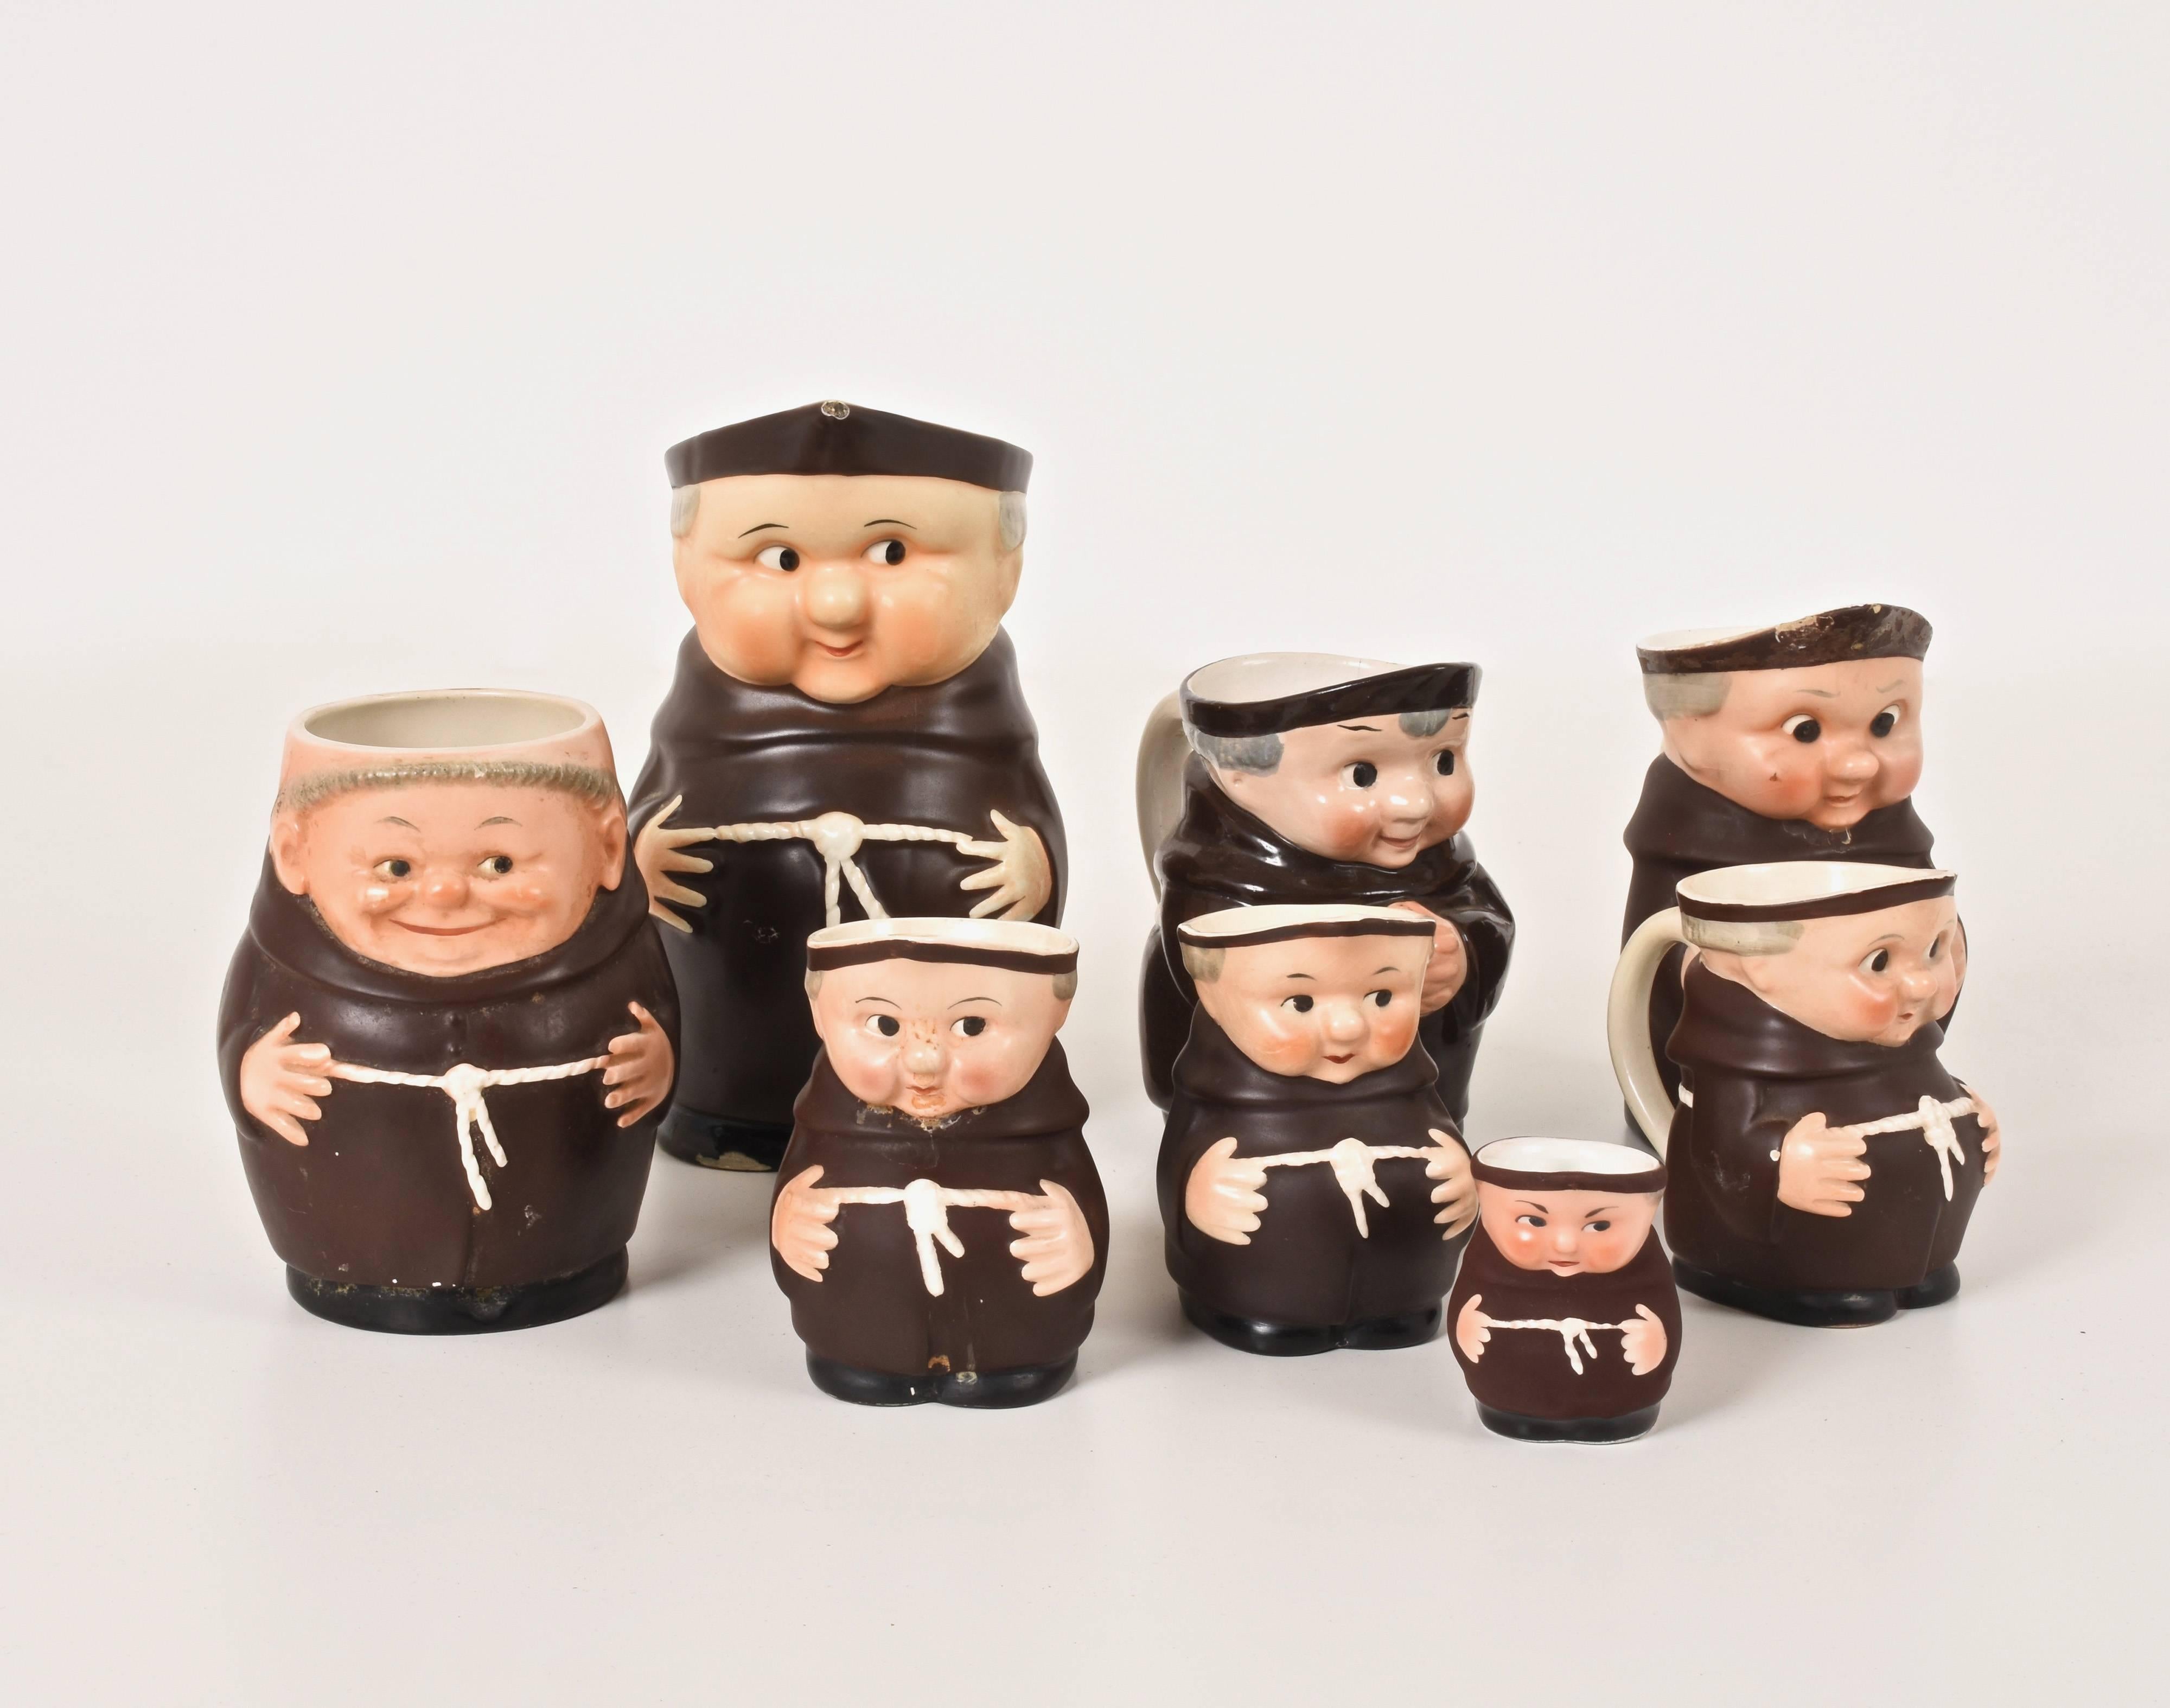 Eight small porcelain mugs. Friars. Various measures, Italian and German.
A piece has some chipping
The largest piece is 19 cm tall,
the smallest 6 cm.